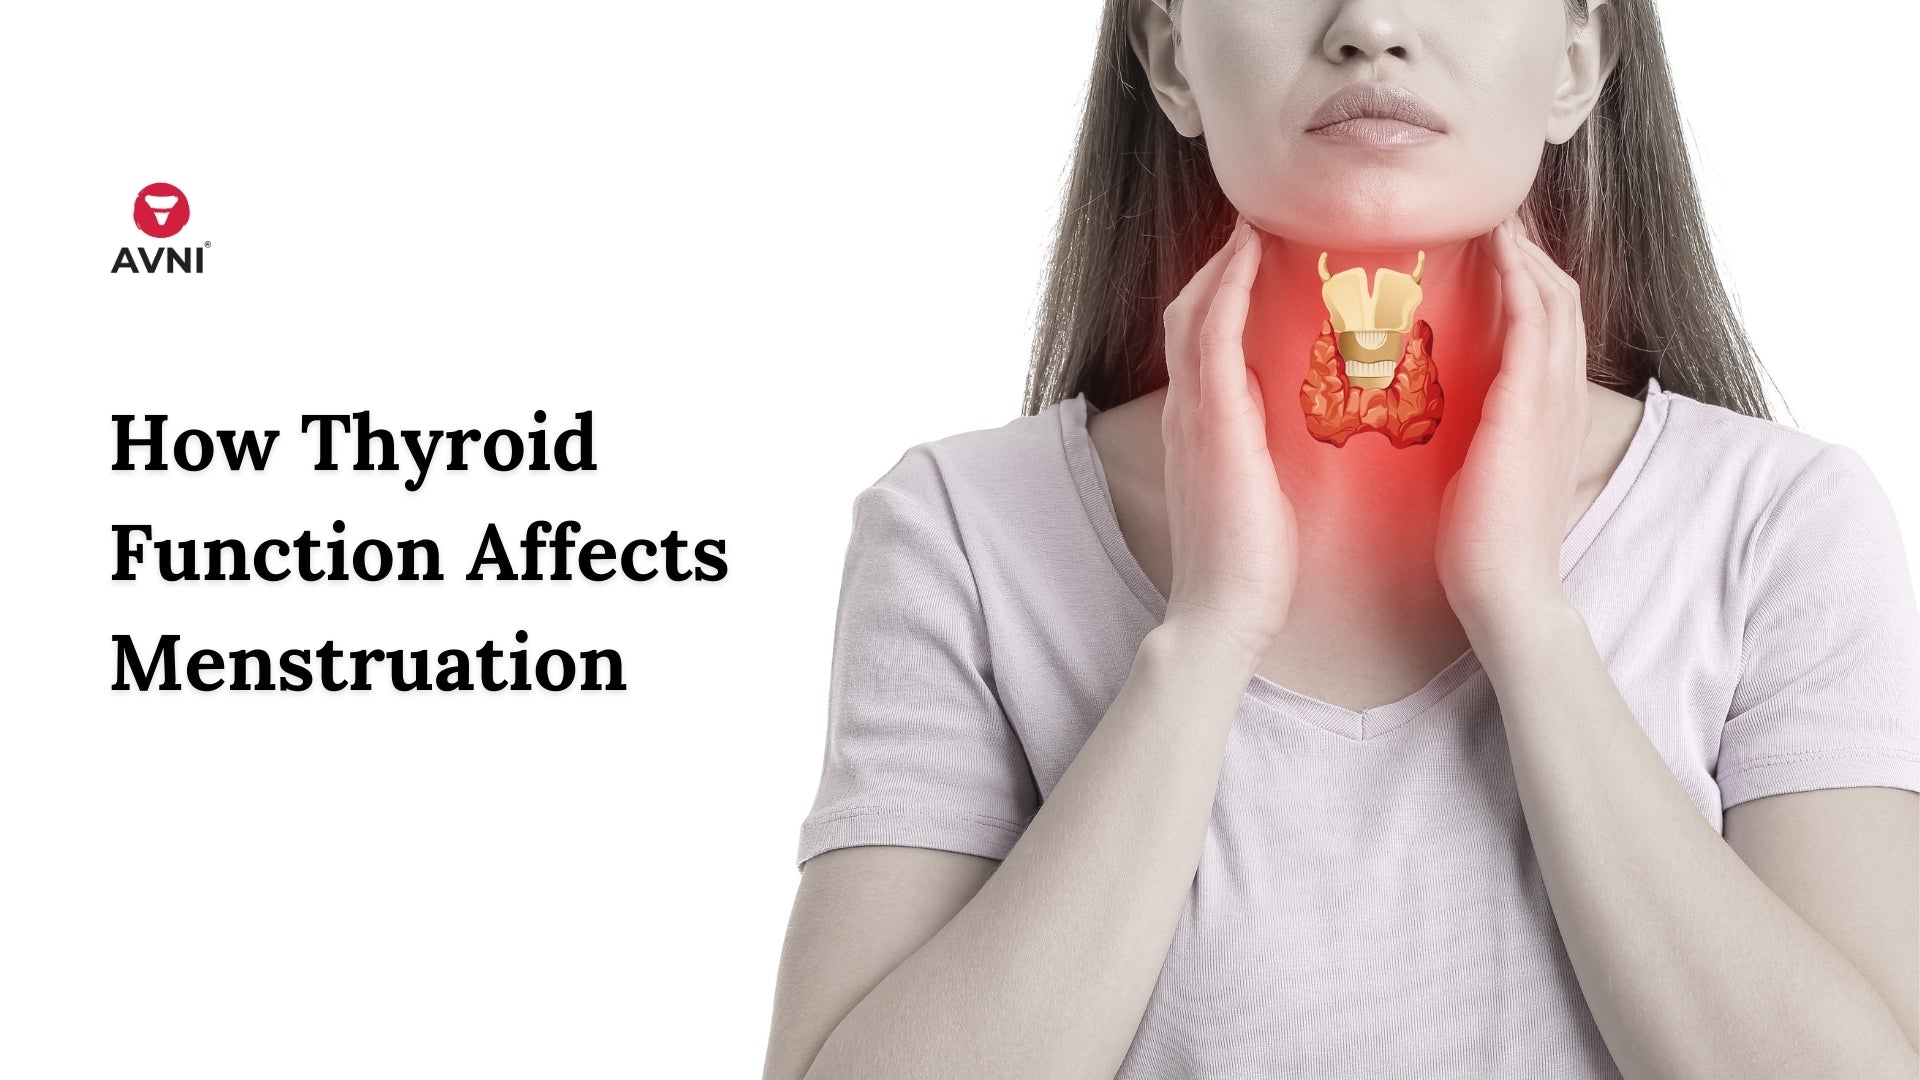 How Thyroid Function Affects Menstruation